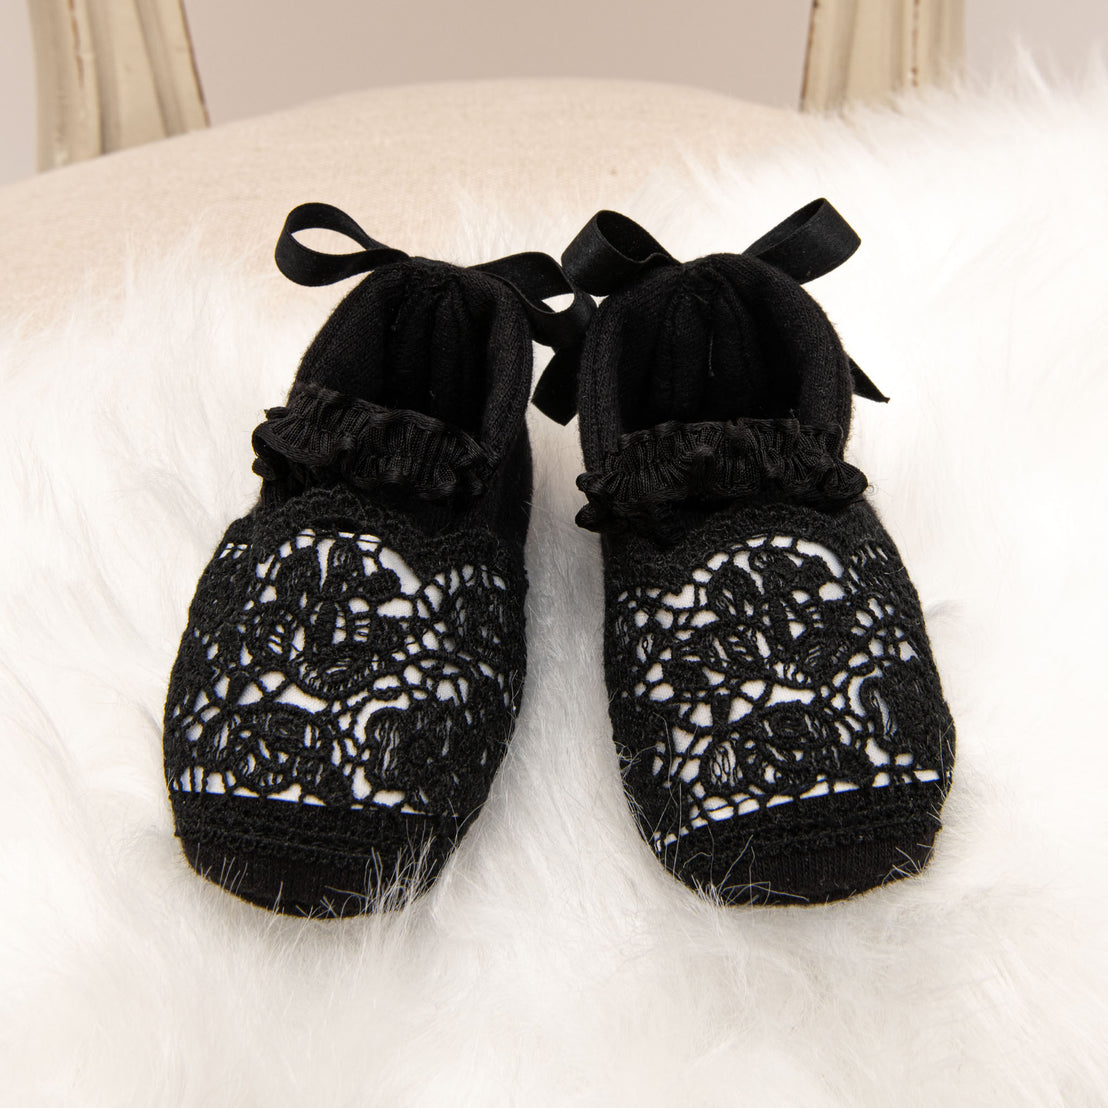 A pair of elegant June Booties with white satin ribbon ties, displayed on a fluffy white textured background.